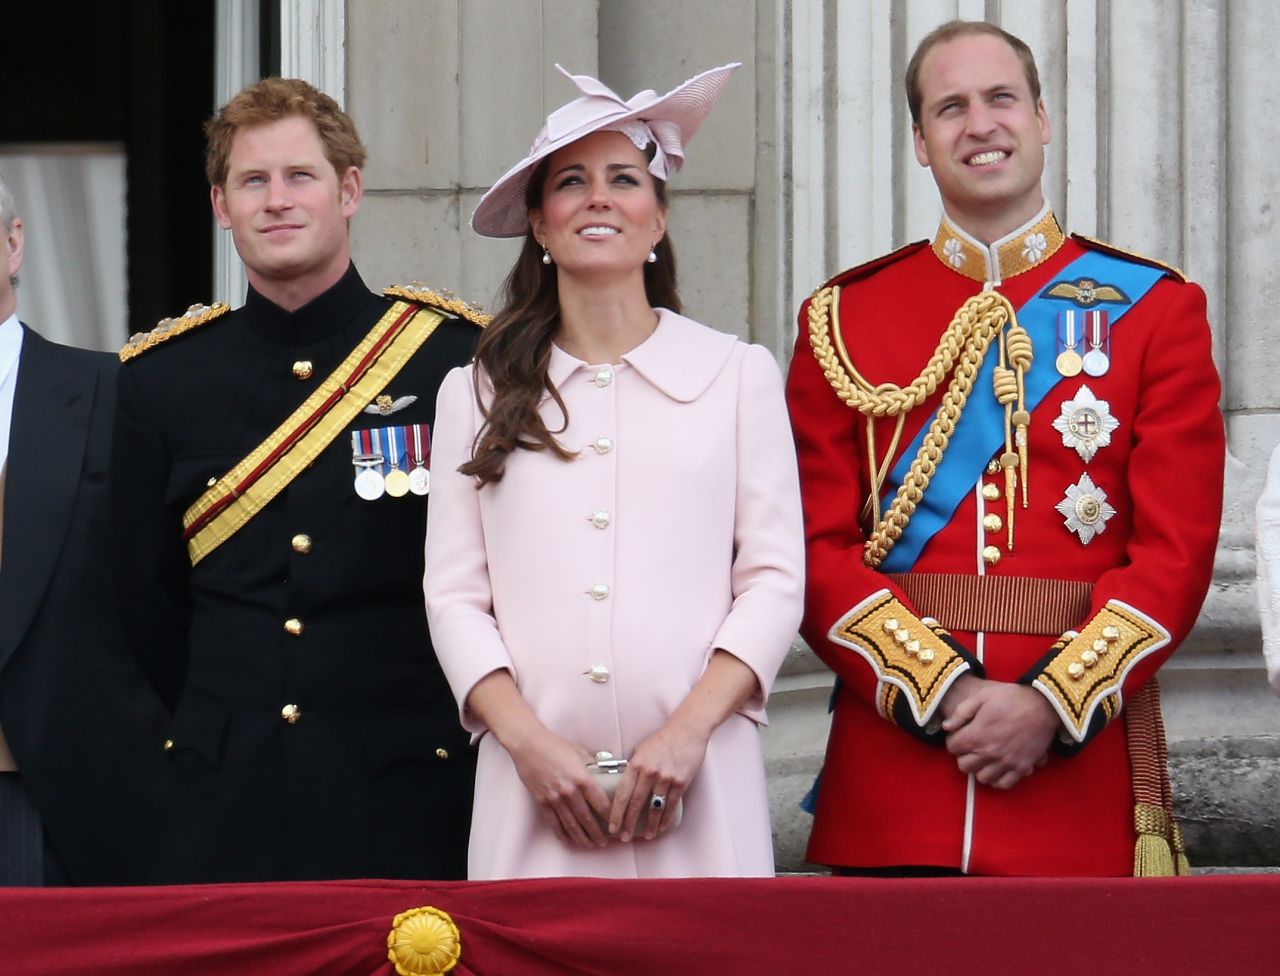 The first child of the Duke and Duchess of Cambridge, Prince William and Catherine, was born on Monday, July 22. Speculation is rife as to what name they will choose for the new heir to the British throne.